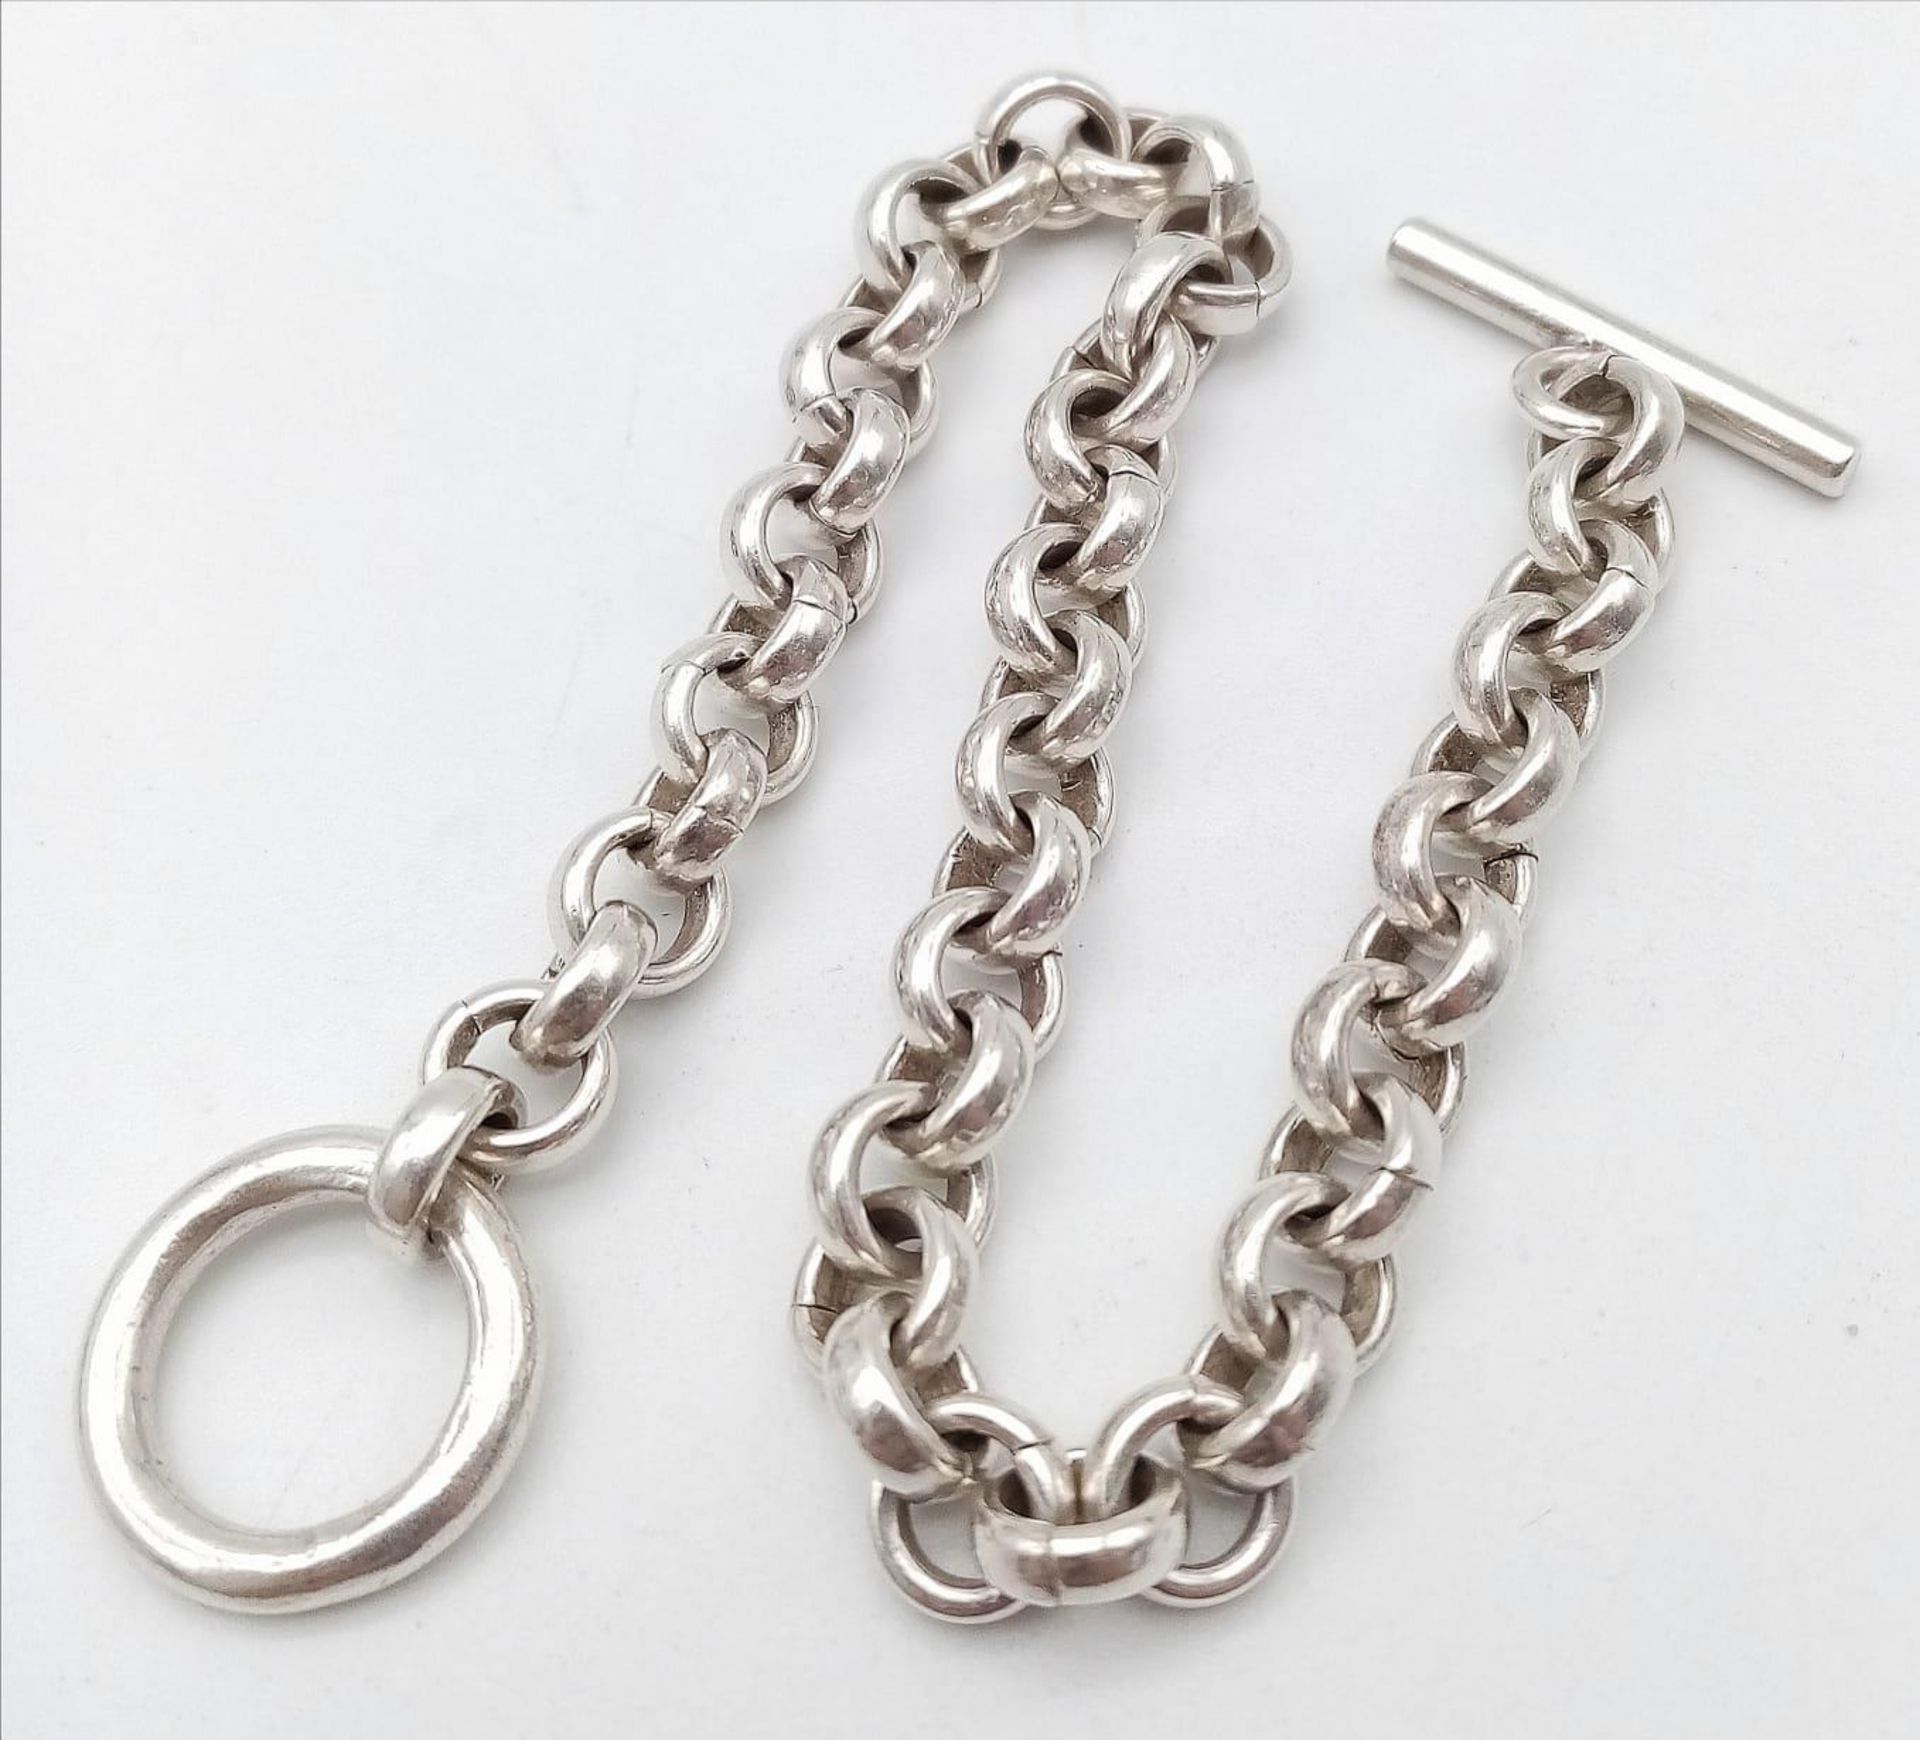 A hallmarked Sterling Silver T-Clasp Bracelet. Weight: 27.26g